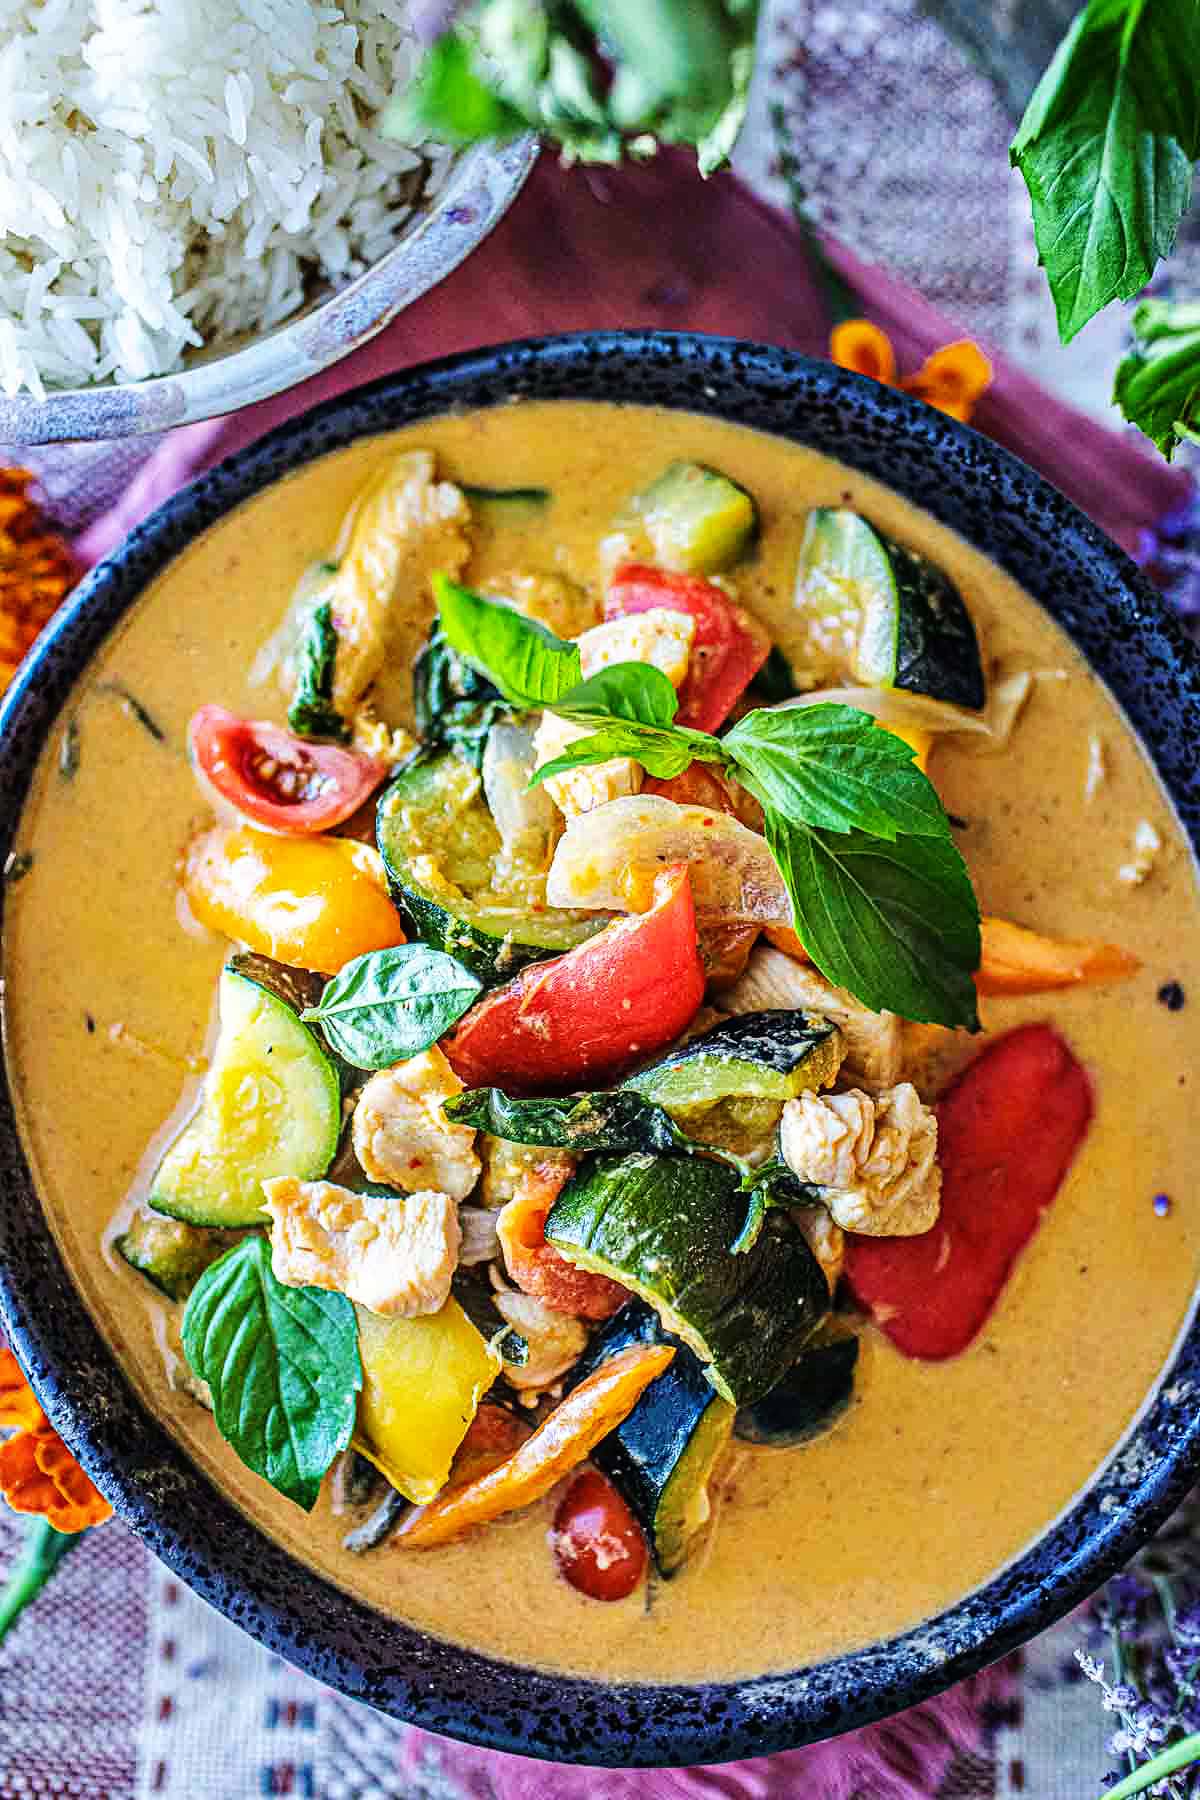  Zucchini Curry is a delightful dish made with Thai red curry paste and coconut milk. It’s a quick and easy dinner - the perfect meal for end-of-summer produce. Make this with chicken breast or Crispy Tofu. 